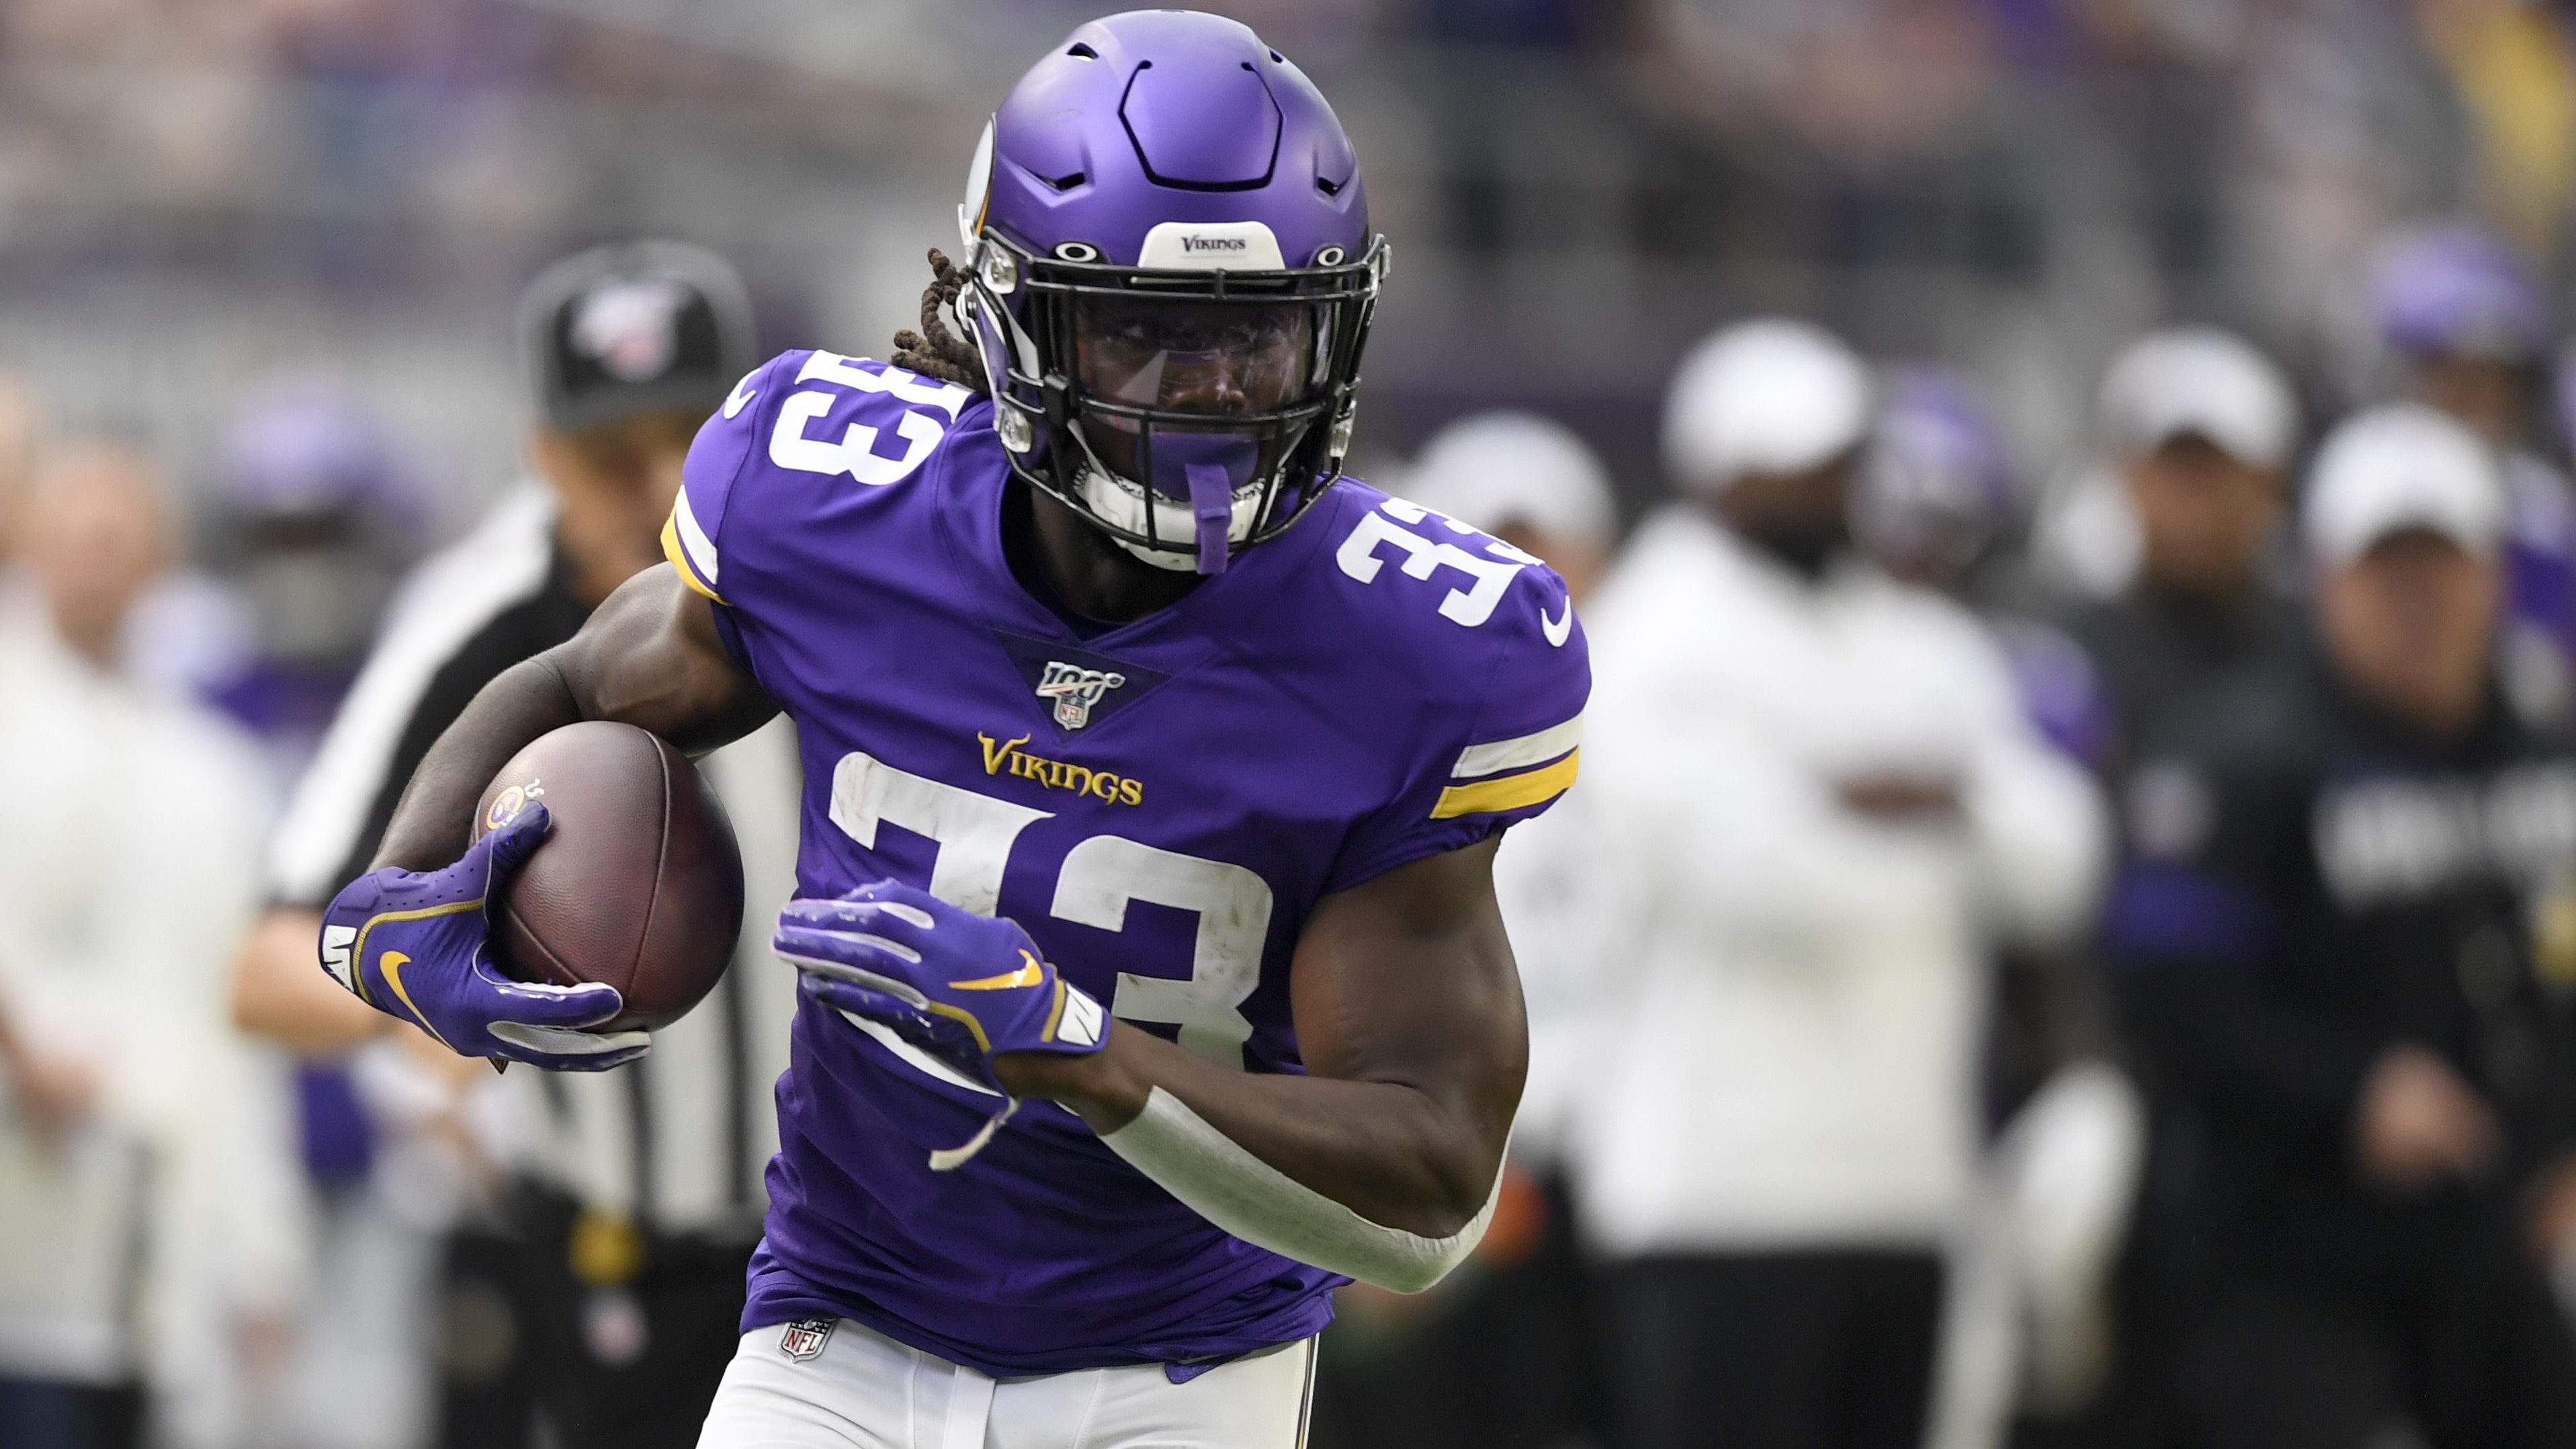 Cowboys' DeMarcus Lawrence Vows to Stop Vikings RB Dalvin